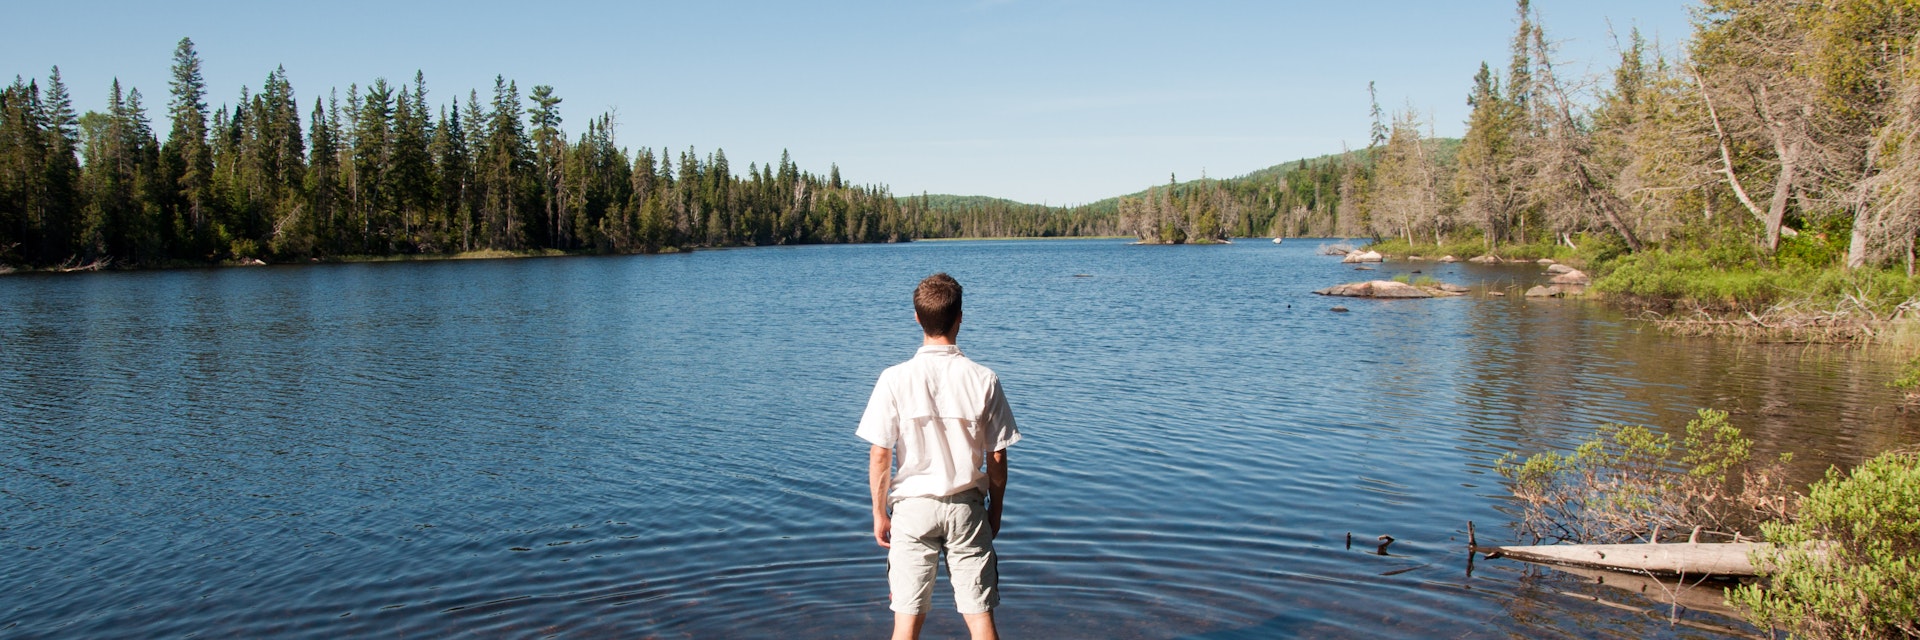 Man standing in water relaxing and contemplating wildness of lake superior provincial park, Canada.